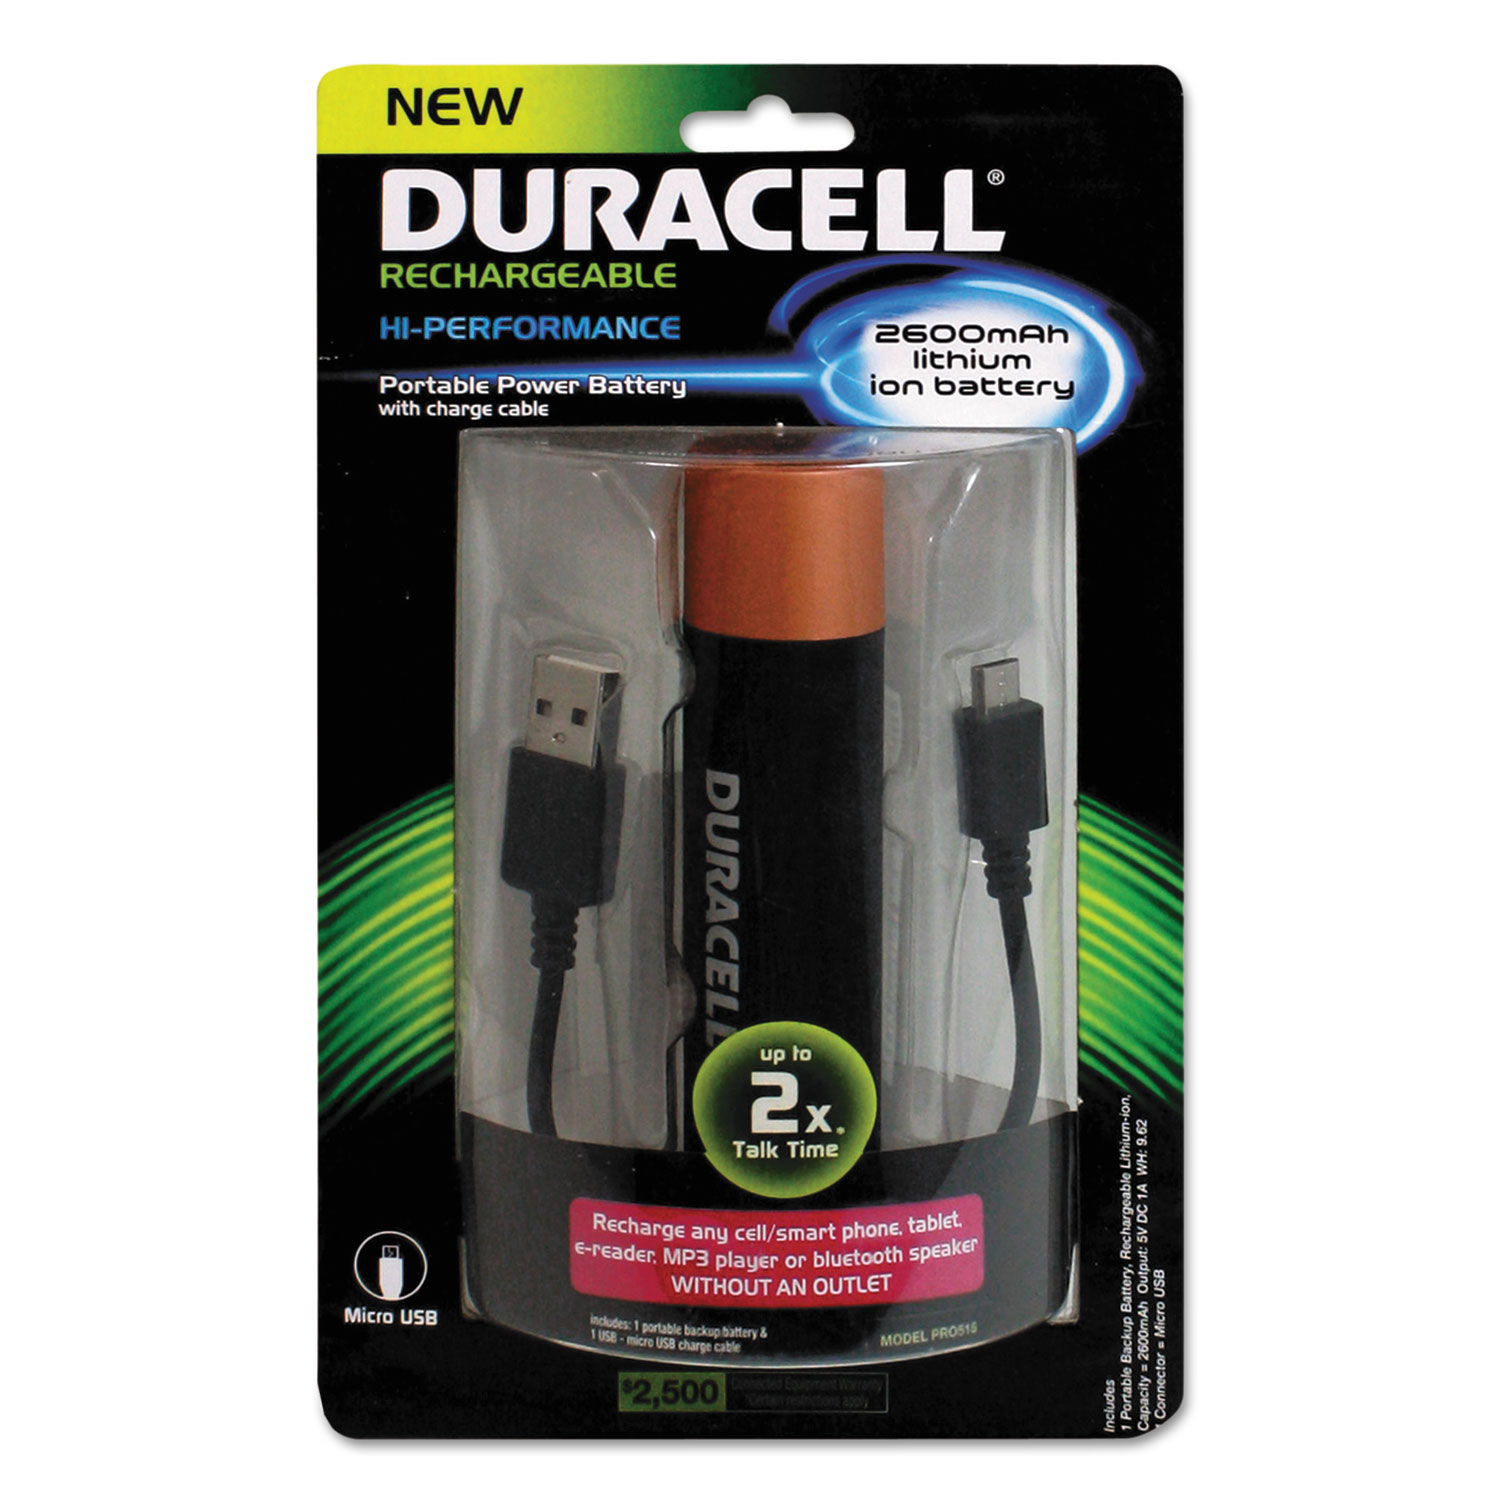  Duracell PRO515 Portable Power Bank with Micro USB Cable, 2600 mAh, Red (ECAPRO515) 